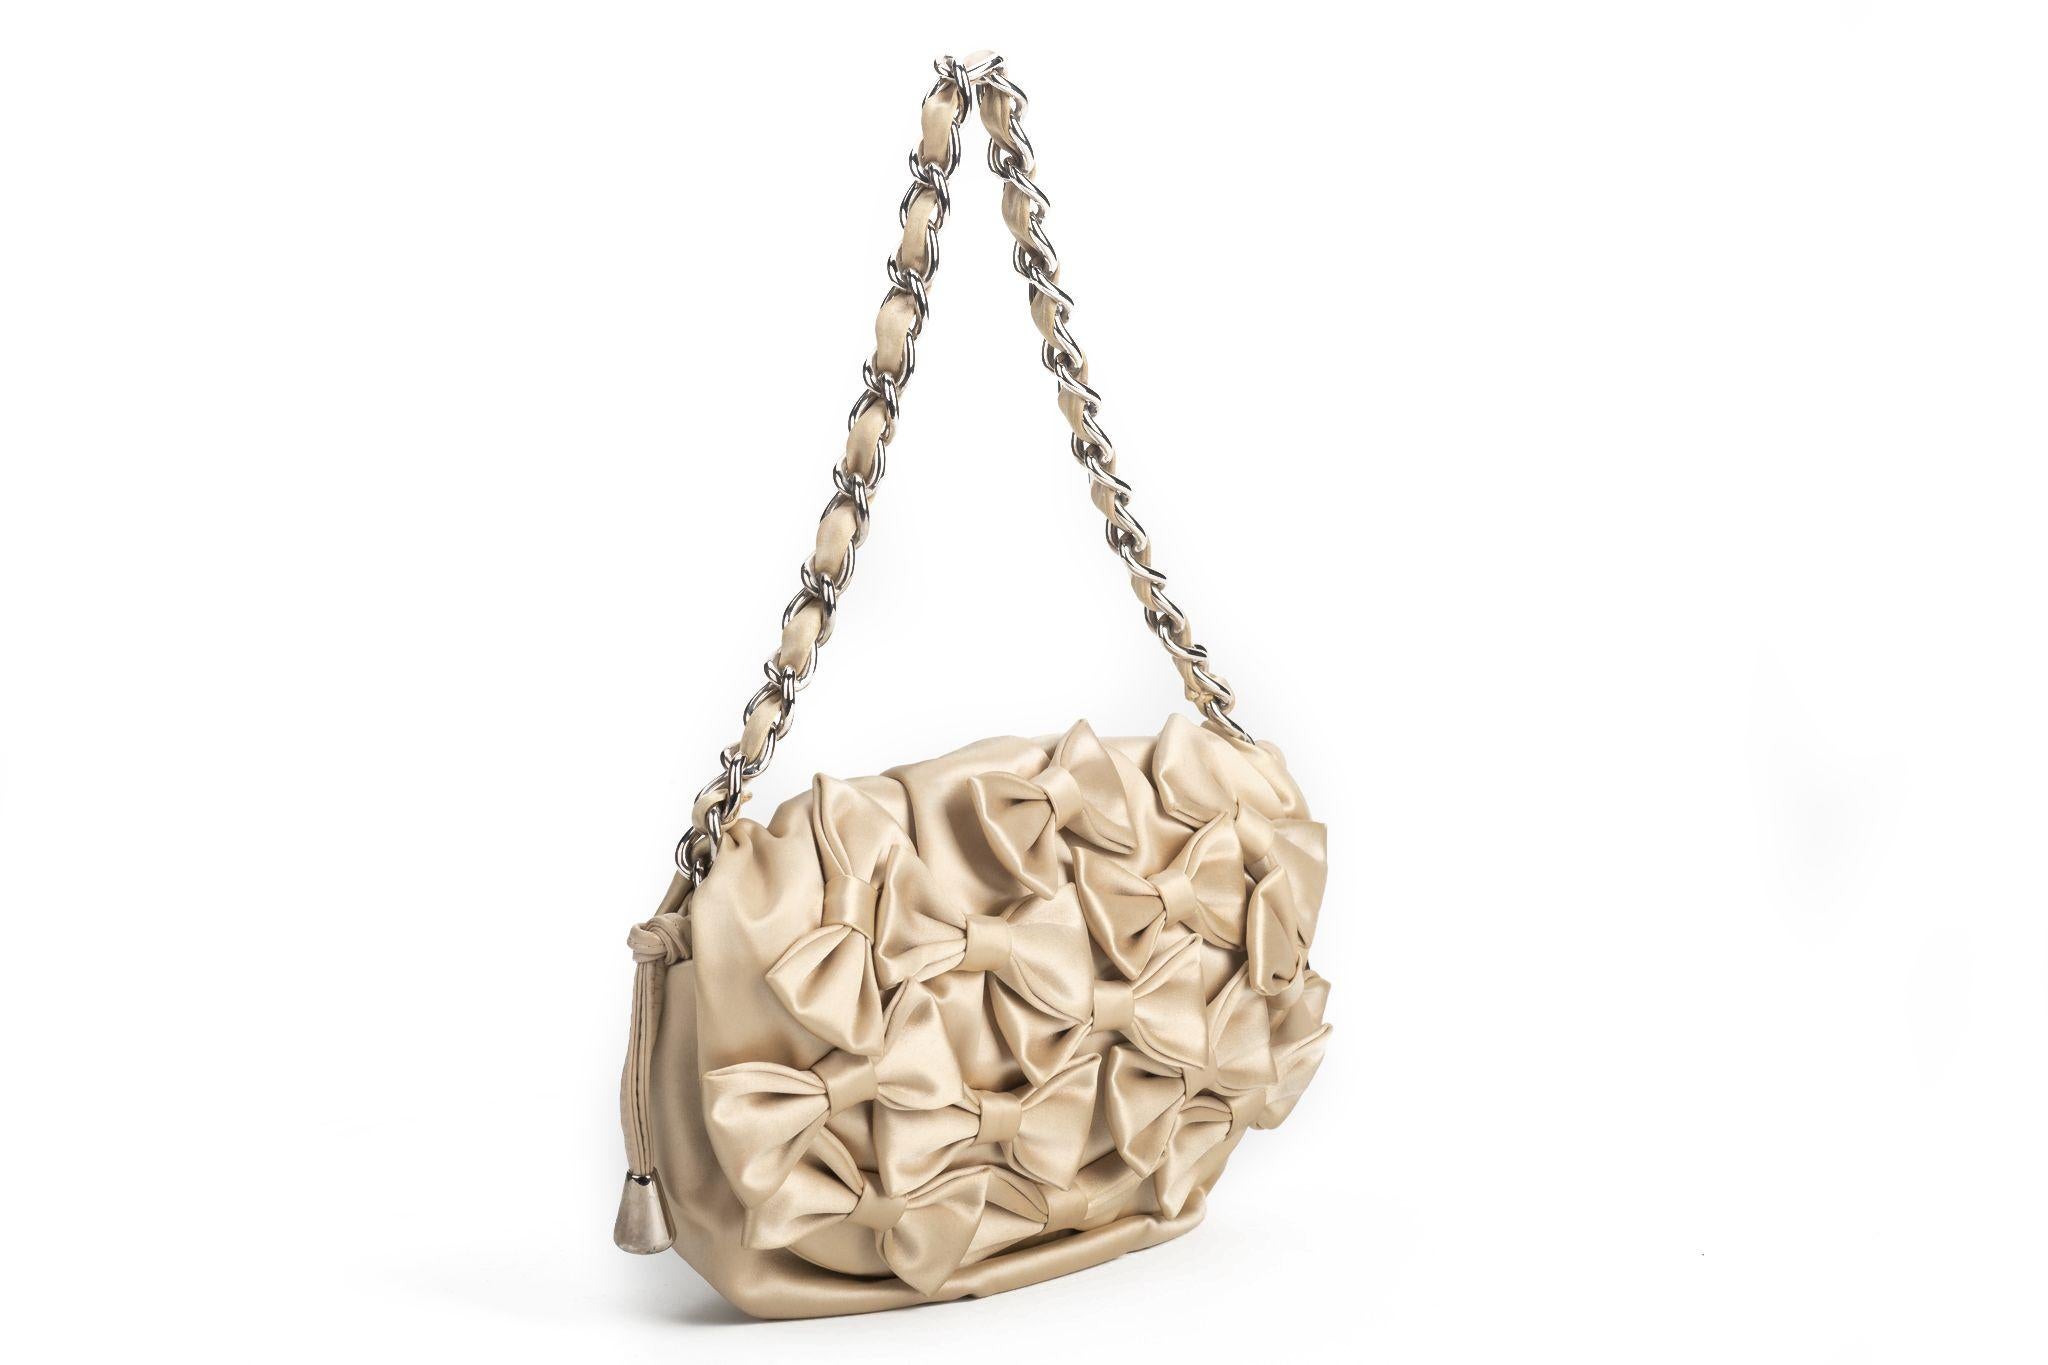 Dolce & Gabbana evening bag made of silk in cream white. The bag is decorated with multiple small bows on the front. It comes with a shoulder chain and it opens with a zip on top of it. The piece is in excellent condition and comes with a dustcover.